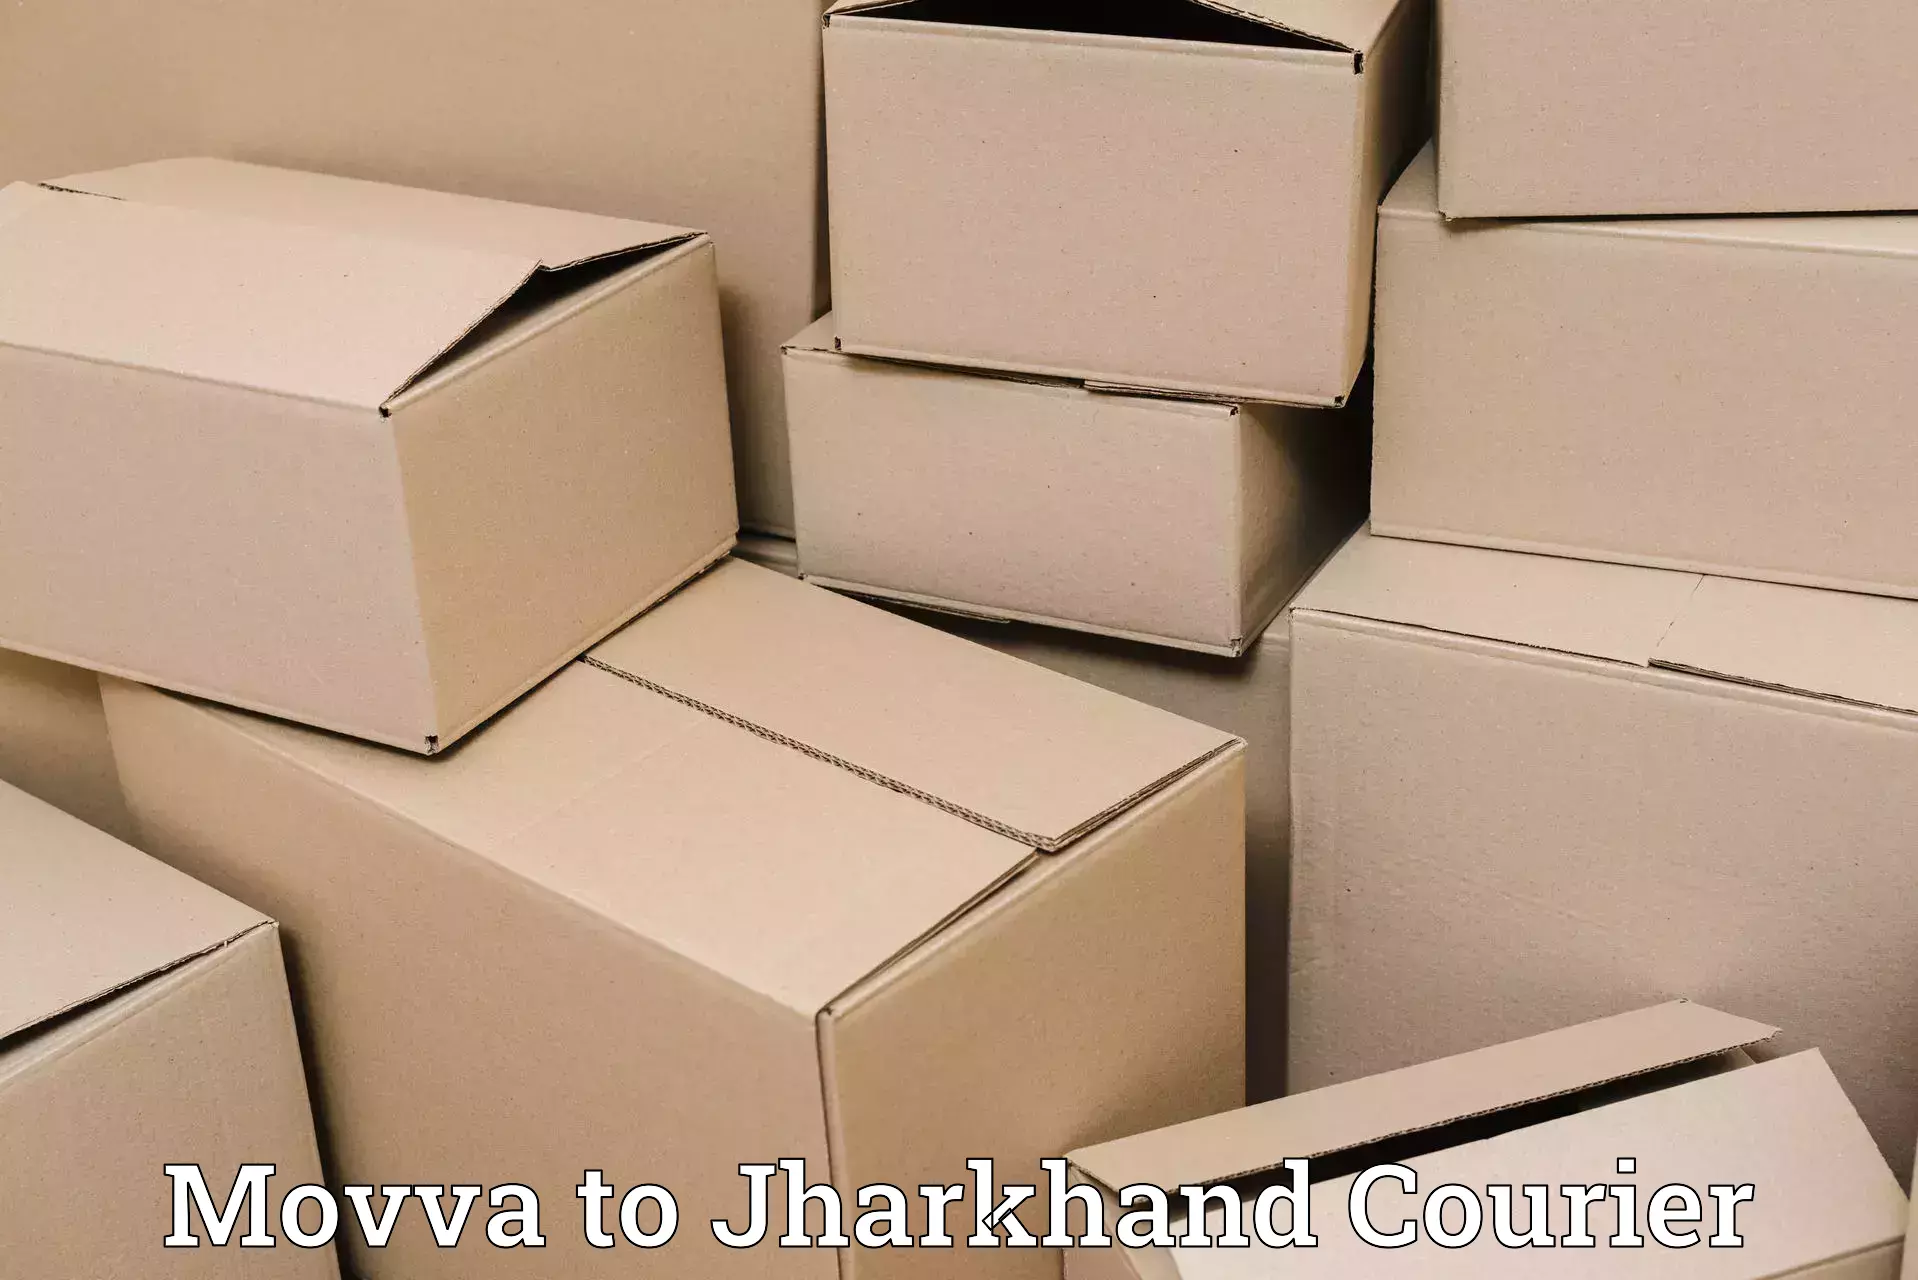 Round-the-clock parcel delivery Movva to Jharkhand